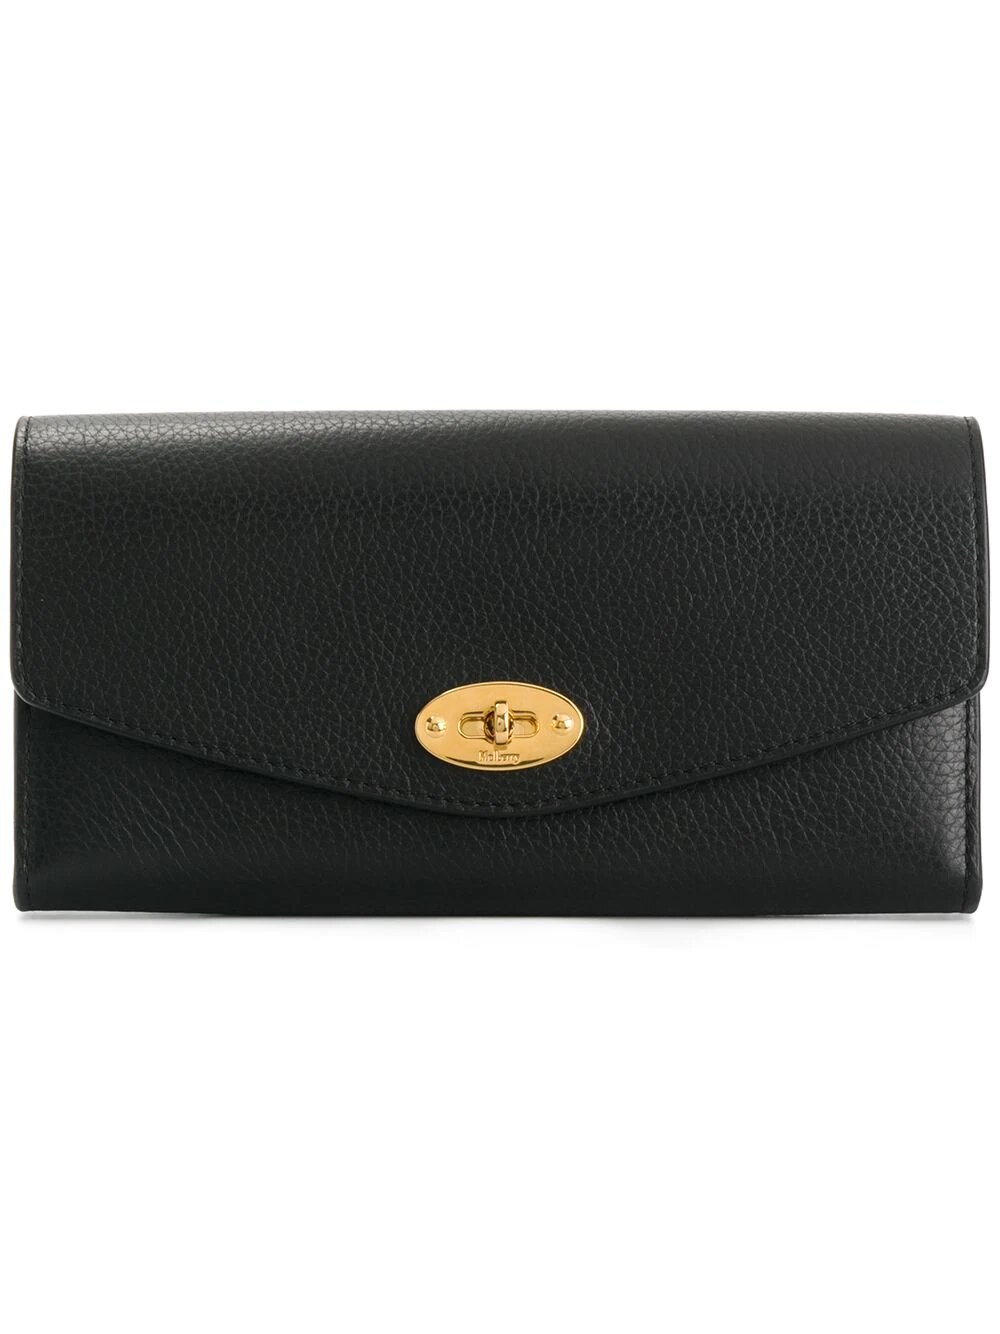 Shop Mulberry Darley Wallet Small In Black  